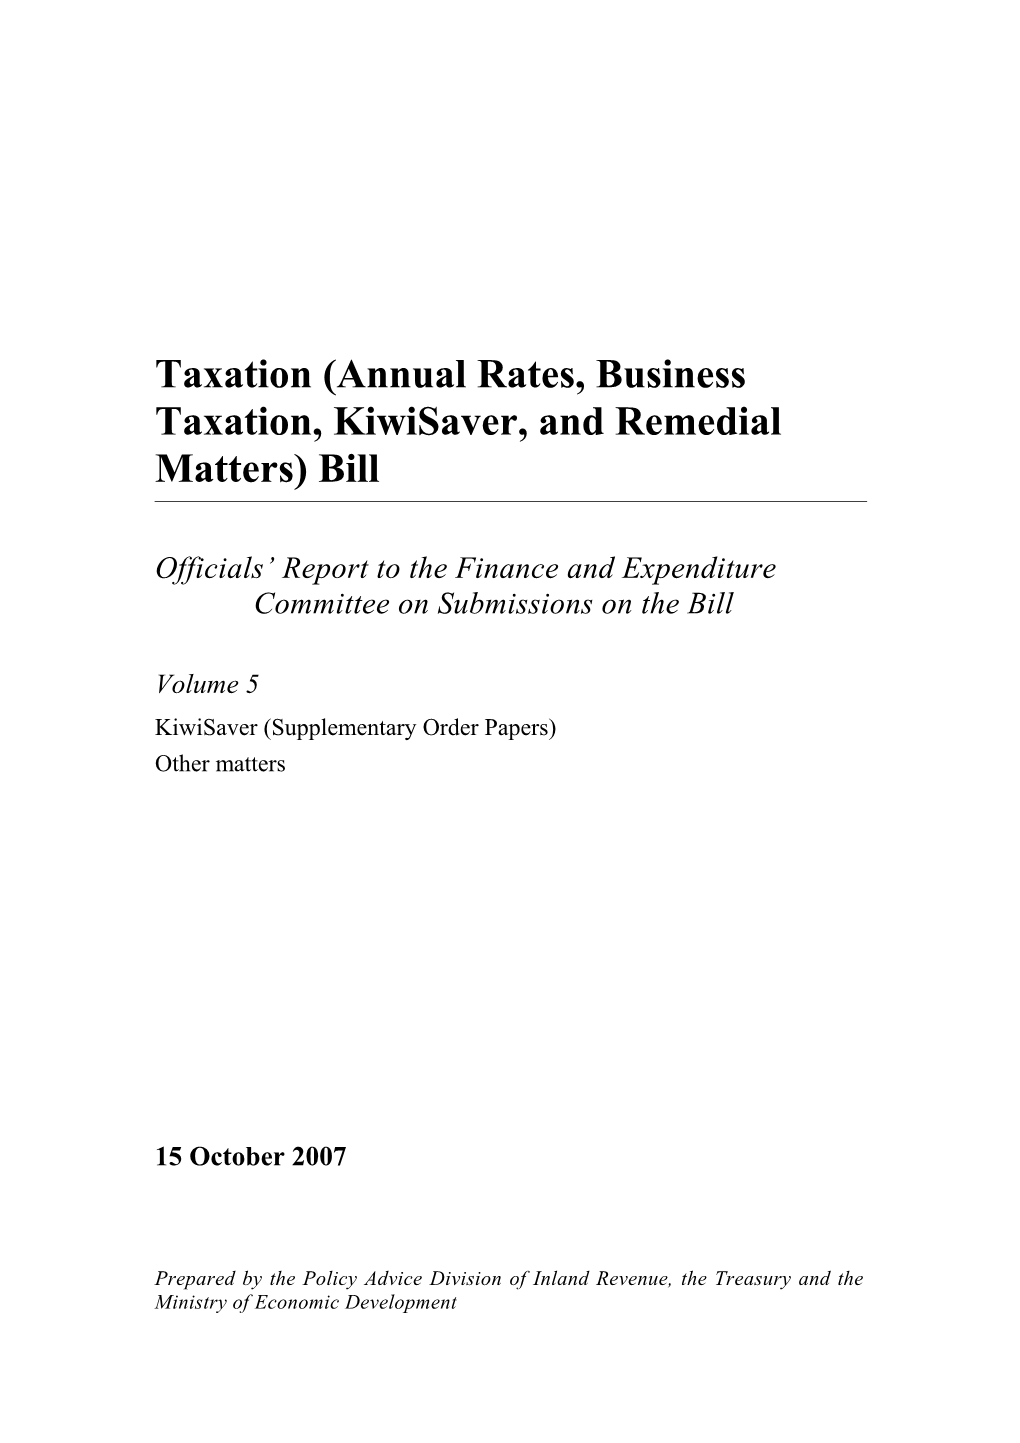 Taxation (Annual Rates, Business Taxation, Kiwisaver, and Remedial Matters) Bill - Volume 5